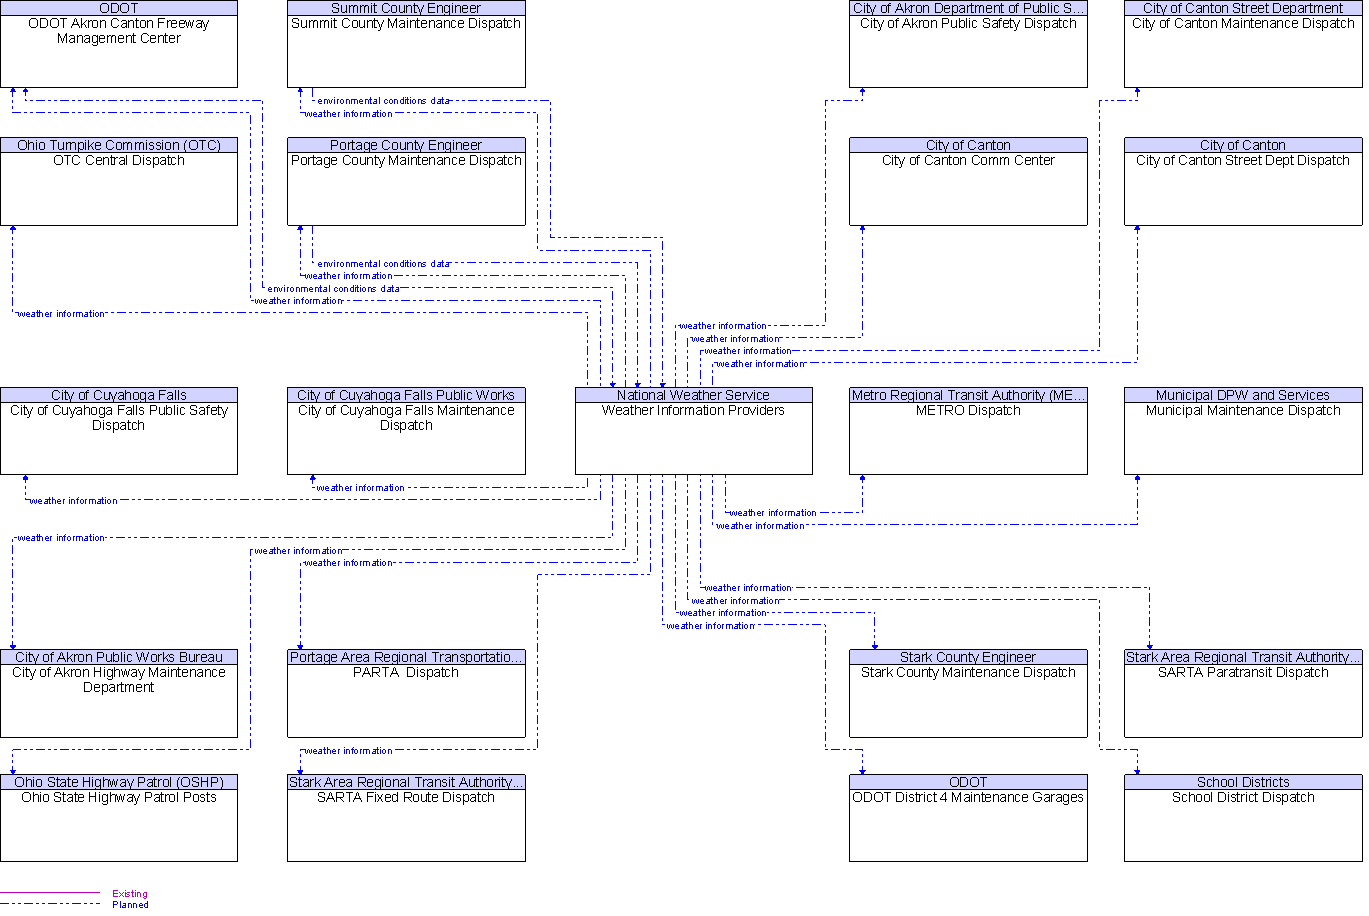 Context Diagram for Weather Information Providers